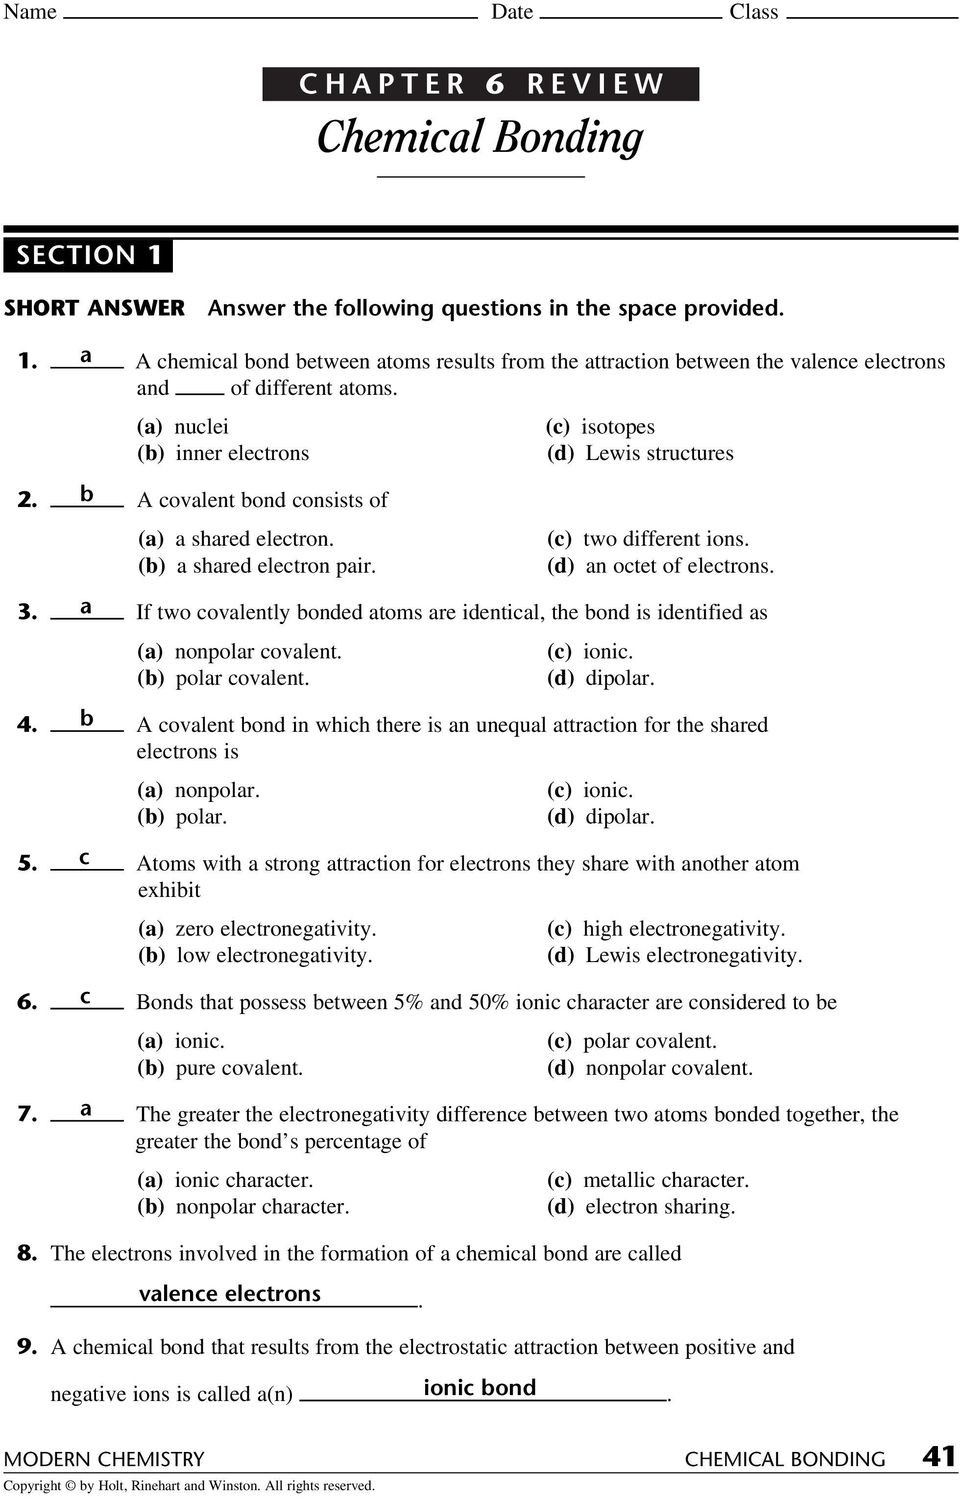 Chemical Bonding Worksheet Key Chapter 6 Review Chemical Bonding Answer the Following